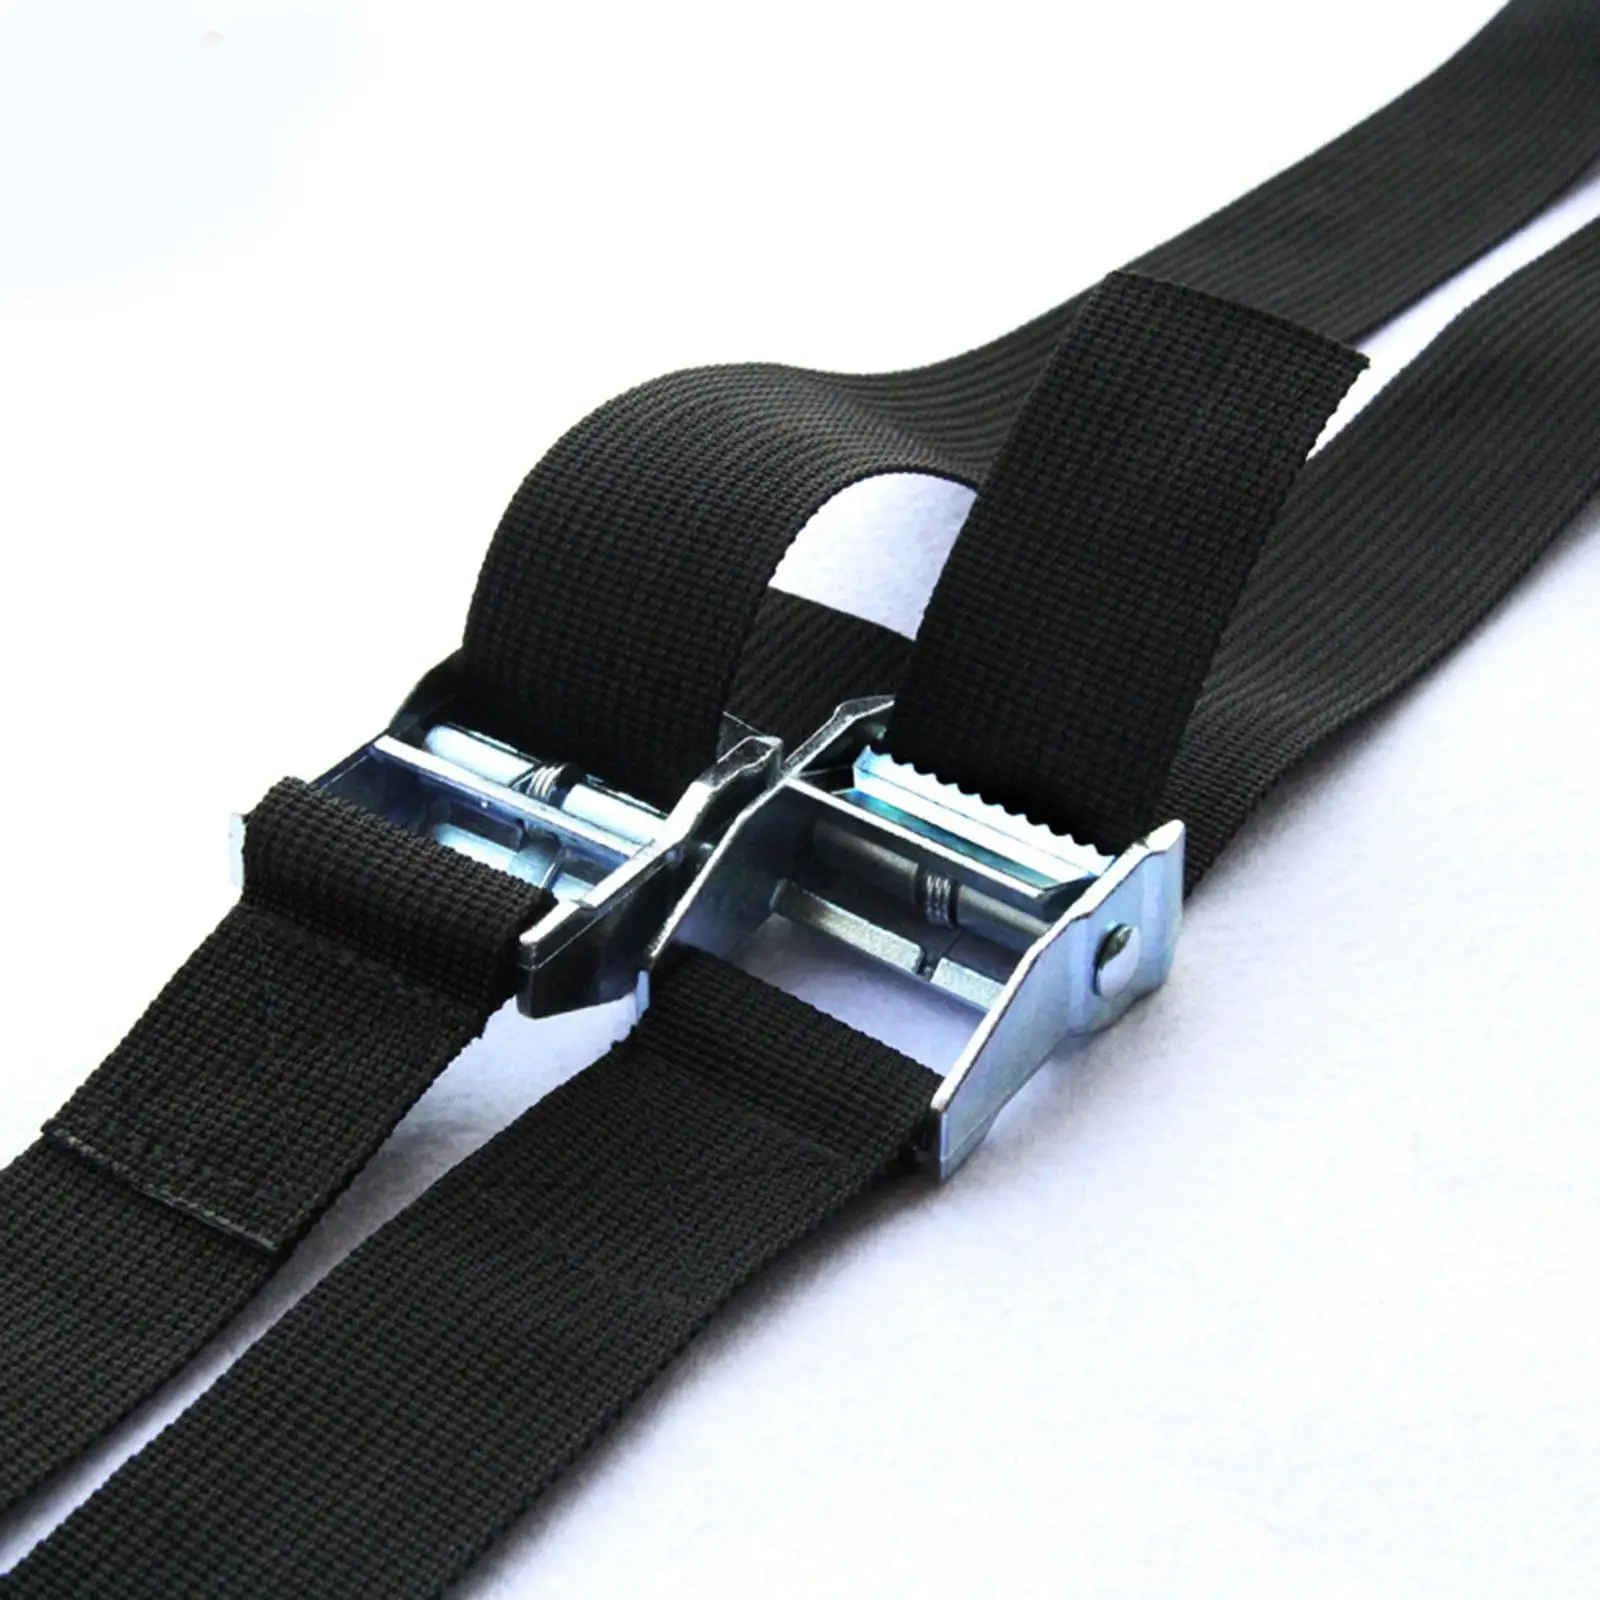 5x Tie Down Straps Zinc Alloy Press Buckle Lashing Straps for Fixing